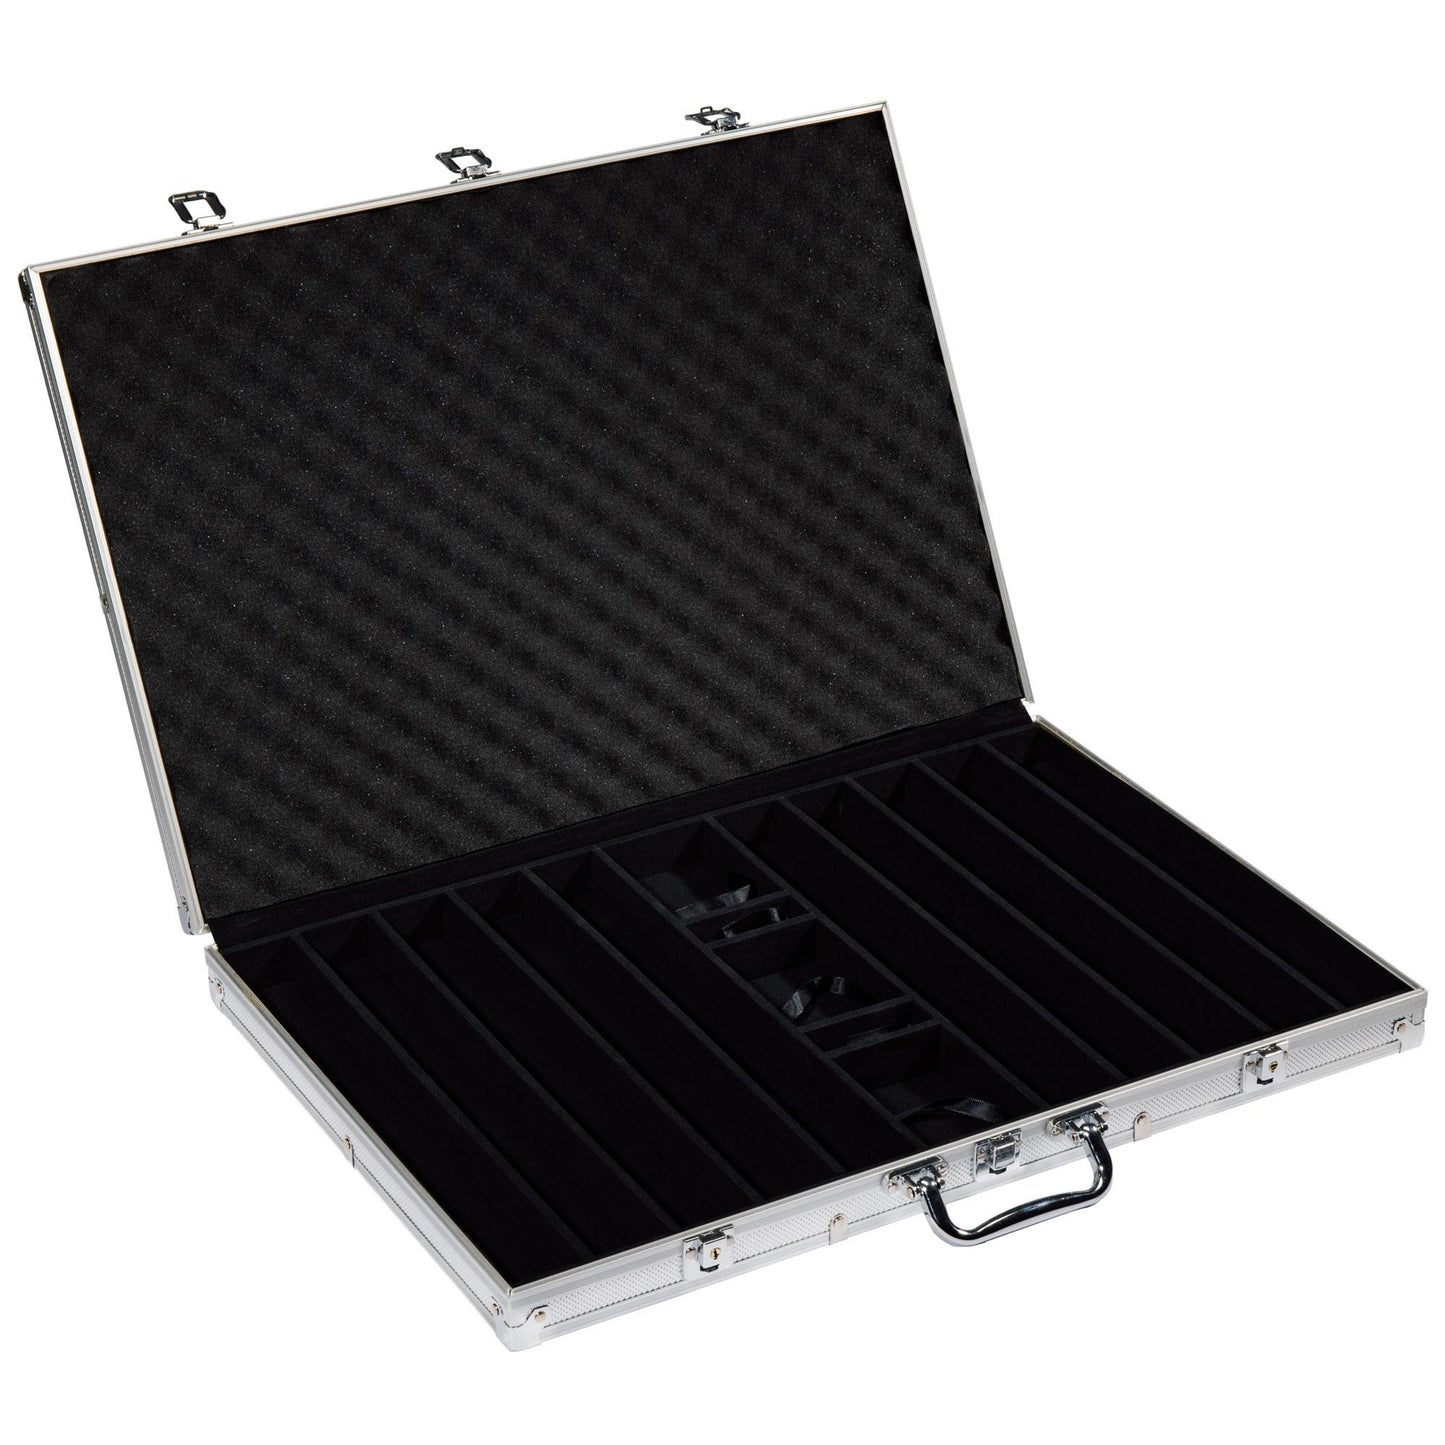 1000 Milano Poker Chips with Aluminum Case